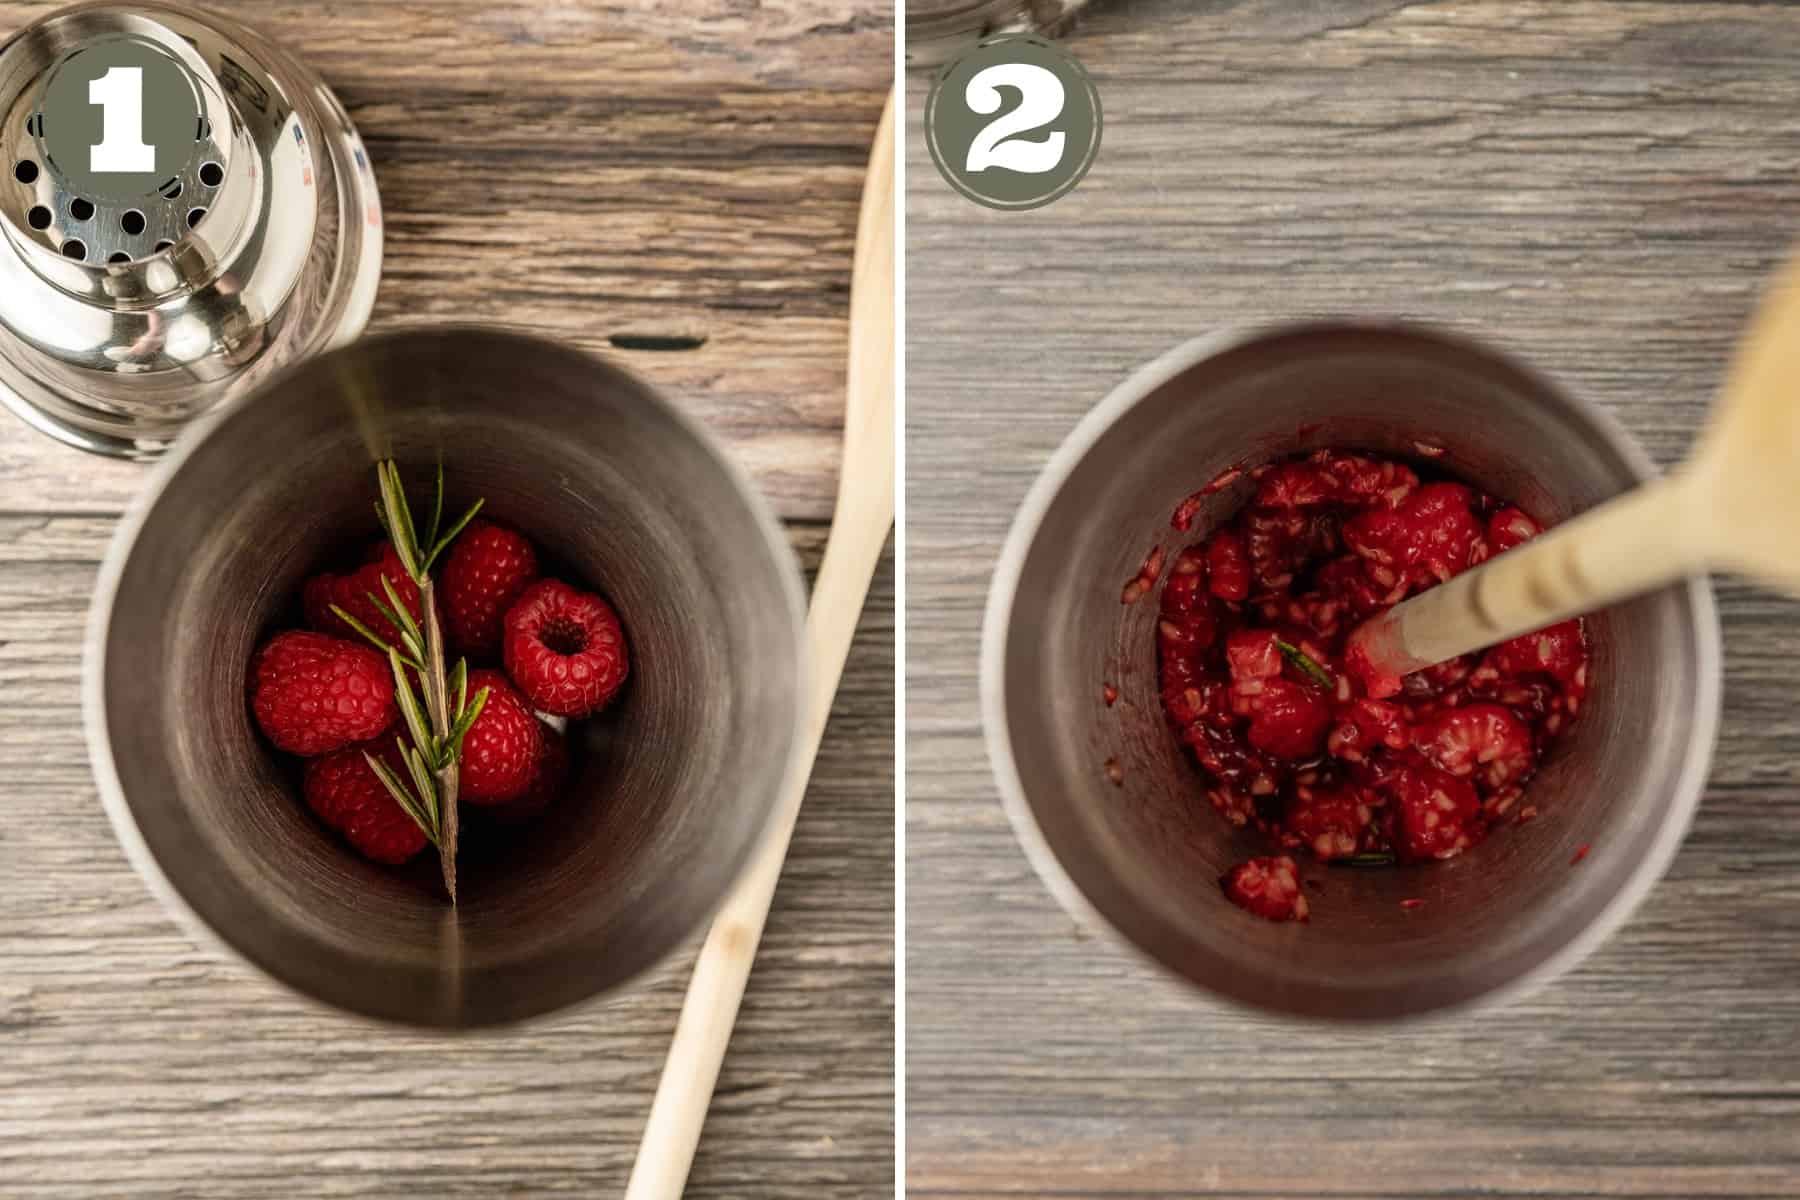 Two side by side process photos of a cocktail shaker with raspberries and rosemary being muddled.